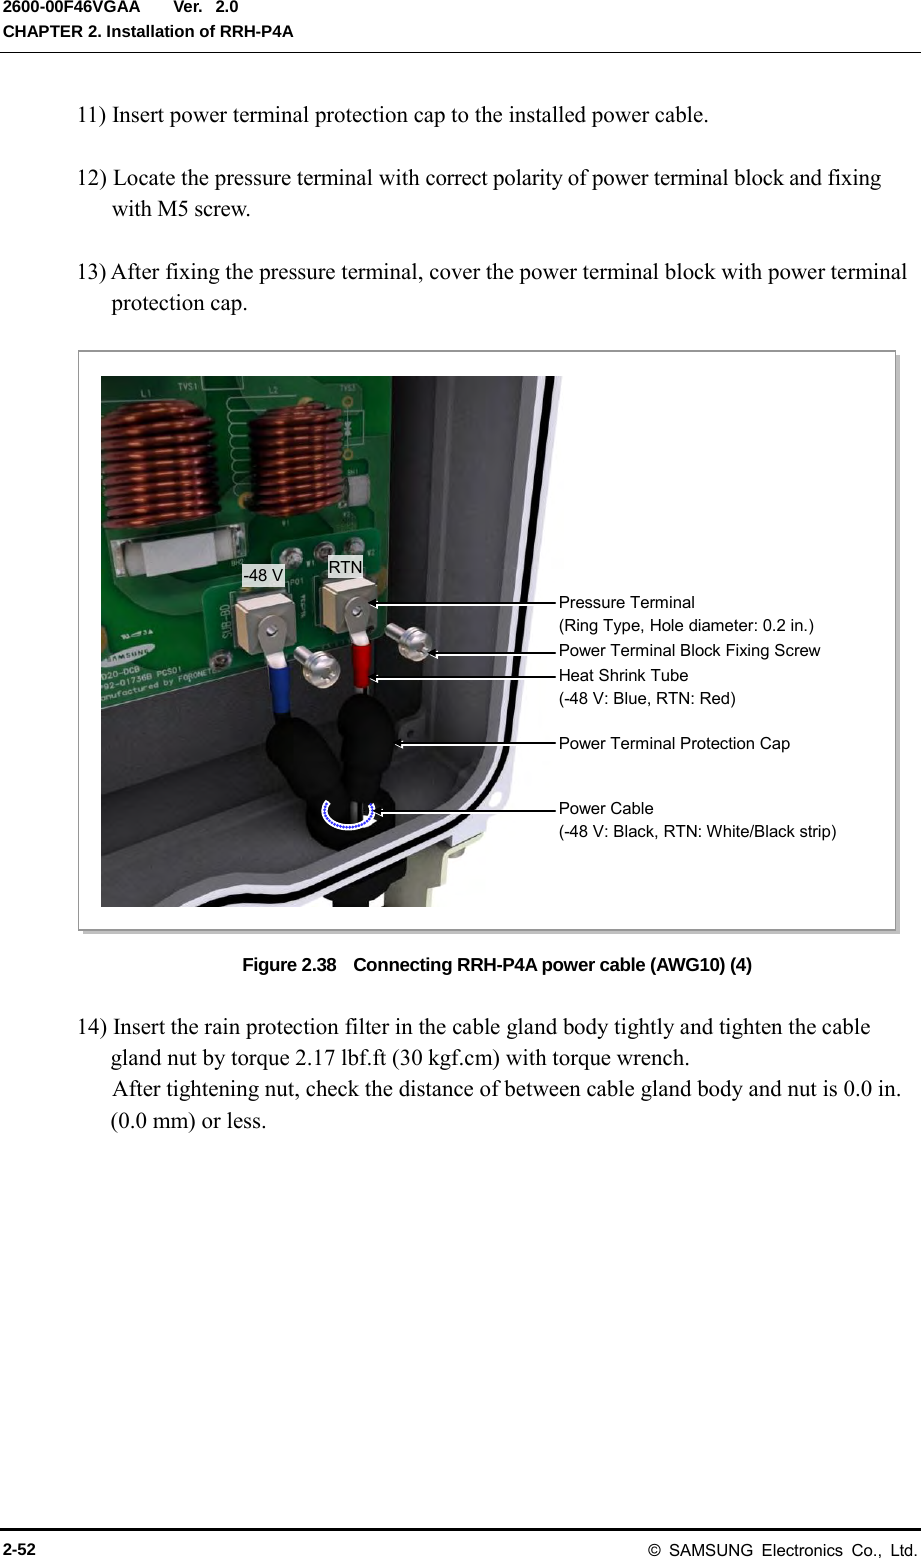  Ver.  CHAPTER 2. Installation of RRH-P4A 2600-00F46VGAA 2.0 11) Insert power terminal protection cap to the installed power cable.  12) Locate the pressure terminal with correct polarity of power terminal block and fixing with M5 screw.  13) After fixing the pressure terminal, cover the power terminal block with power terminal protection cap.  Figure 2.38    Connecting RRH-P4A power cable (AWG10) (4)  14) Insert the rain protection filter in the cable gland body tightly and tighten the cable gland nut by torque 2.17 lbf.ft (30 kgf.cm) with torque wrench. After tightening nut, check the distance of between cable gland body and nut is 0.0 in. (0.0 mm) or less. Power Cable (-48 V: Black, RTN: White/Black strip) Pressure Terminal (Ring Type, Hole diameter: 0.2 in.) RTN -48 V Heat Shrink Tube (-48 V: Blue, RTN: Red) Power Terminal Block Fixing Screw Power Terminal Protection Cap 2-52 © SAMSUNG Electronics Co., Ltd. 